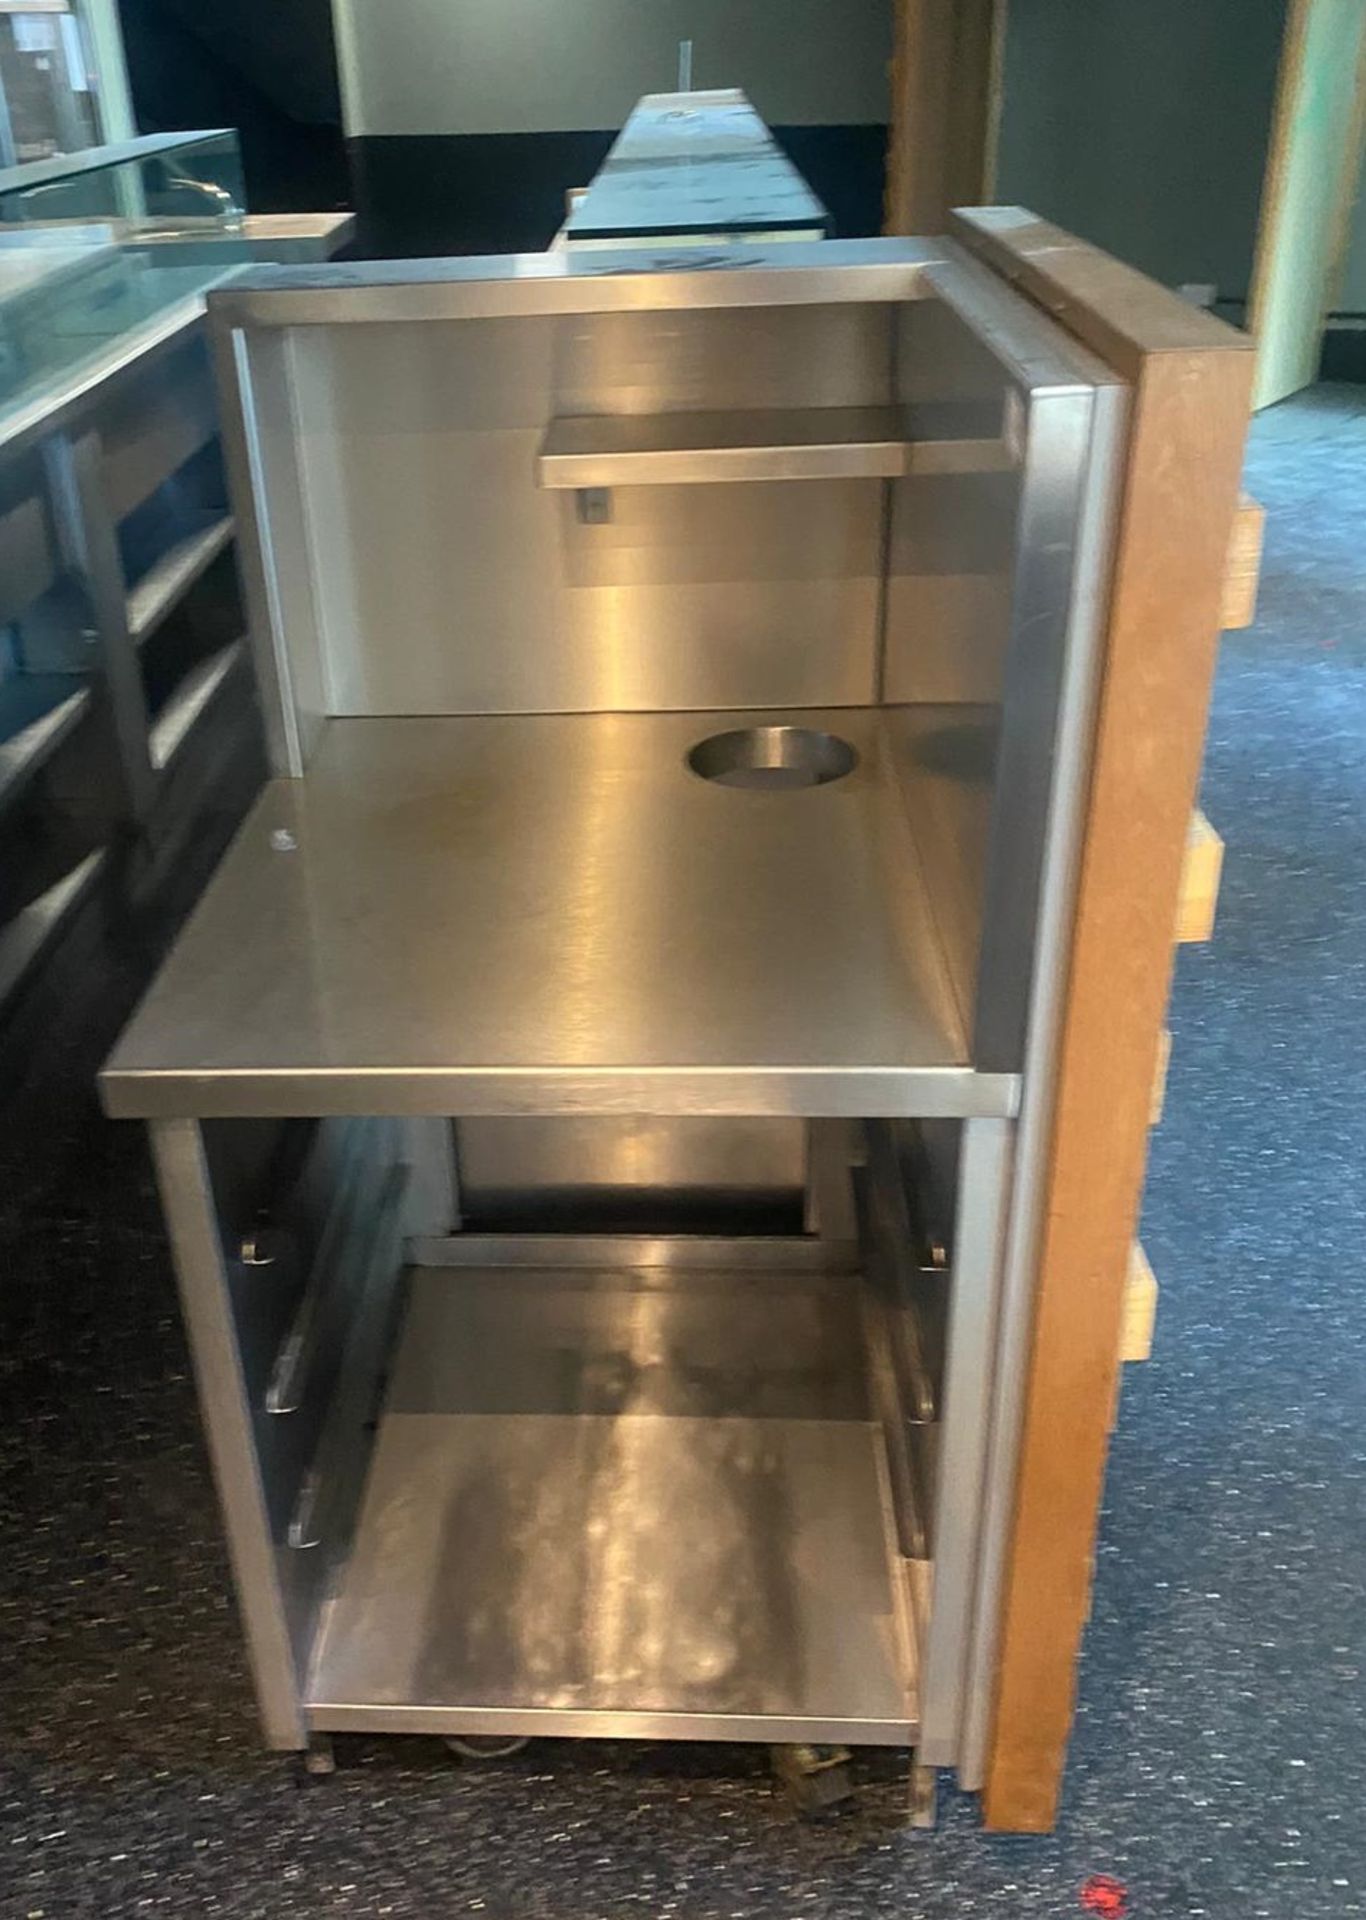 1 x Stainless Steel Service Trolley With Tray Runners and Three Dimensional Wooden Block Fascia - Image 2 of 3